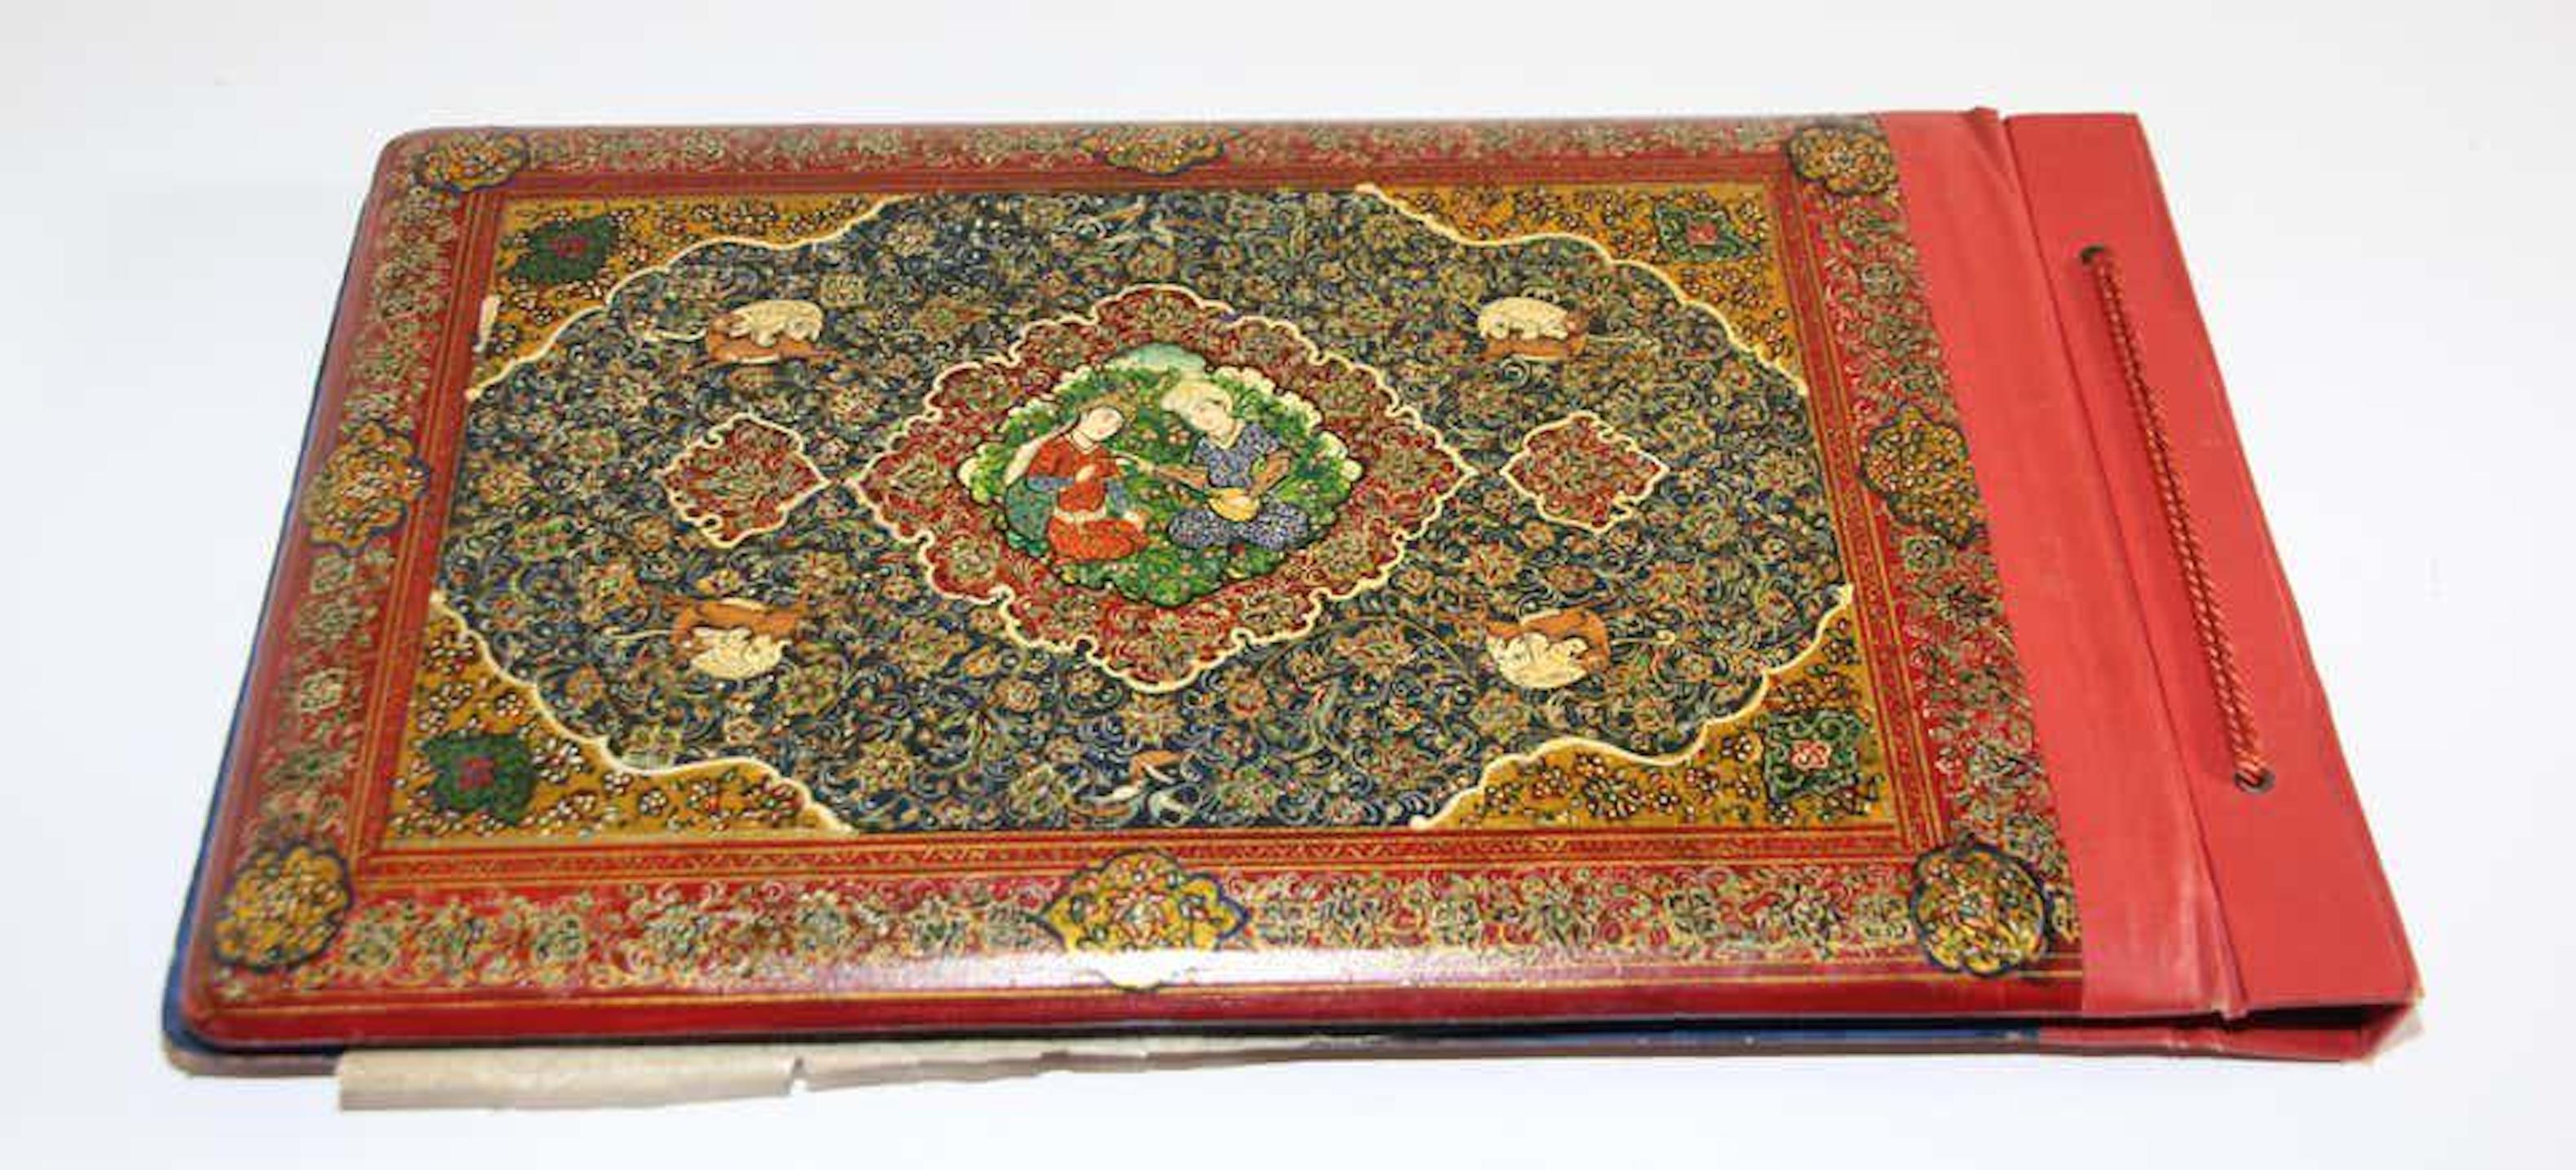 Hand Painted Middle Eastern Moorish Style Photo Album, 19th Century For Sale 11